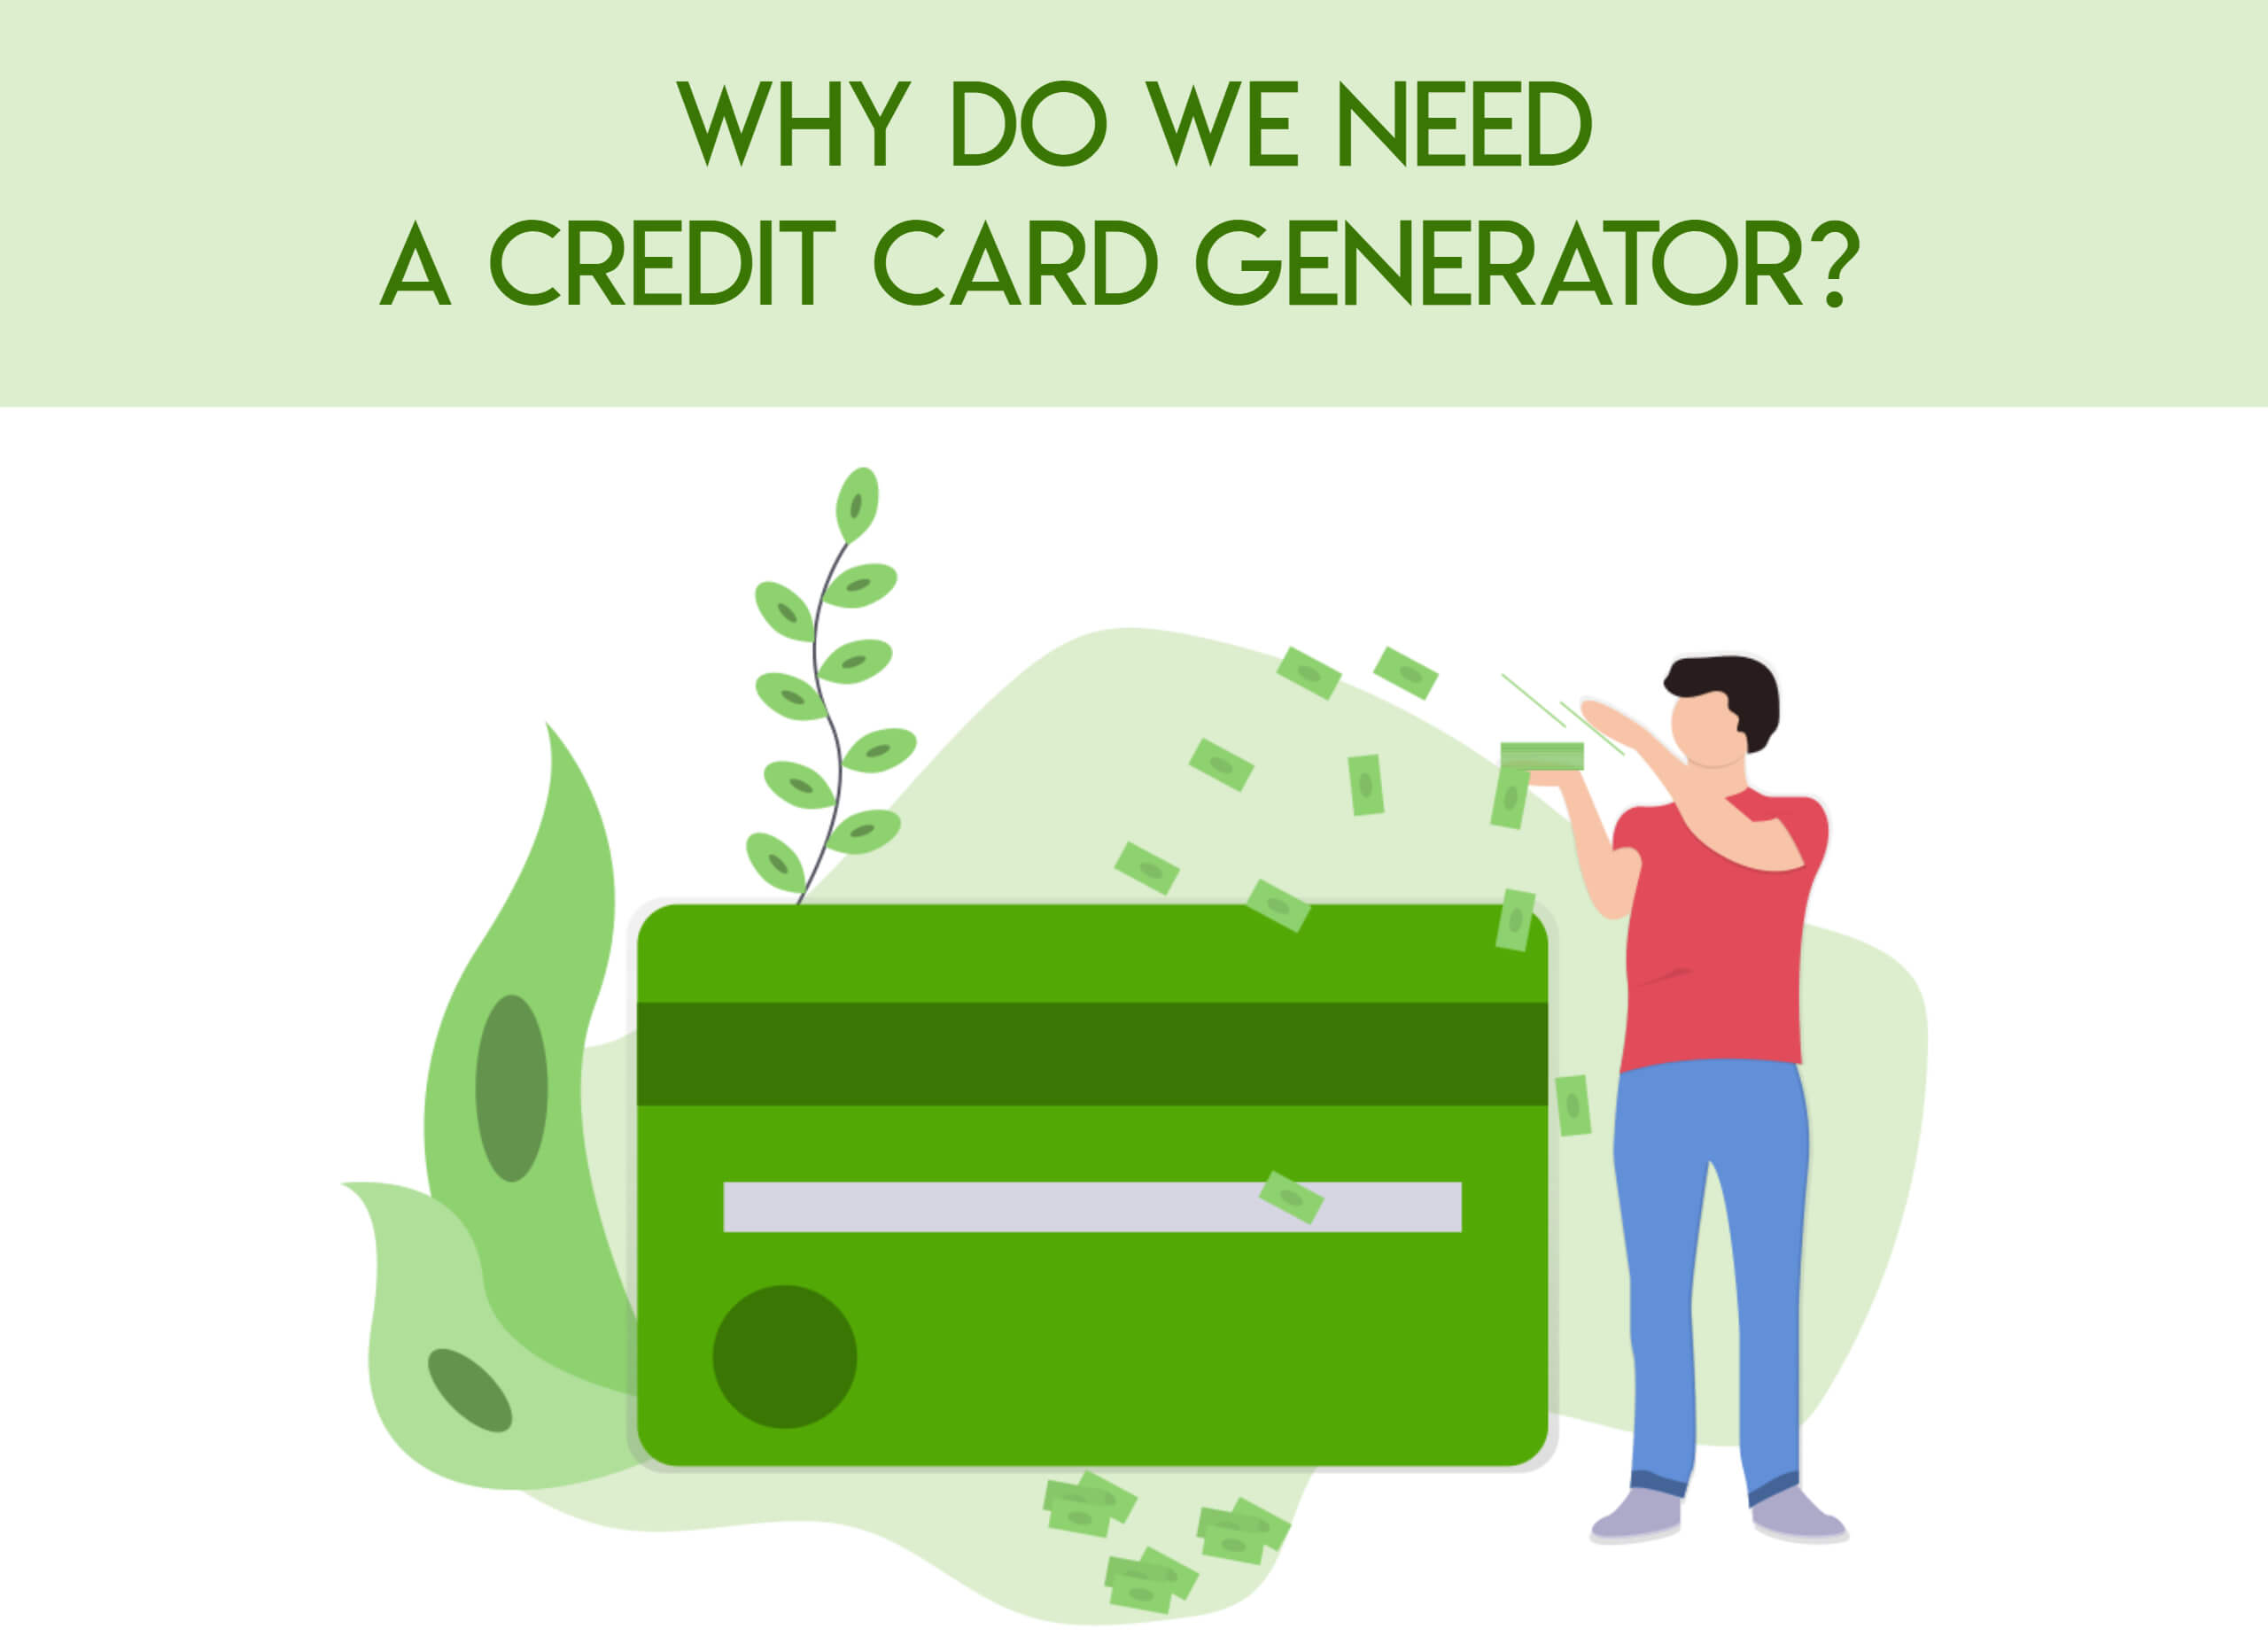 Why Do We Need a Credit Card Generator?